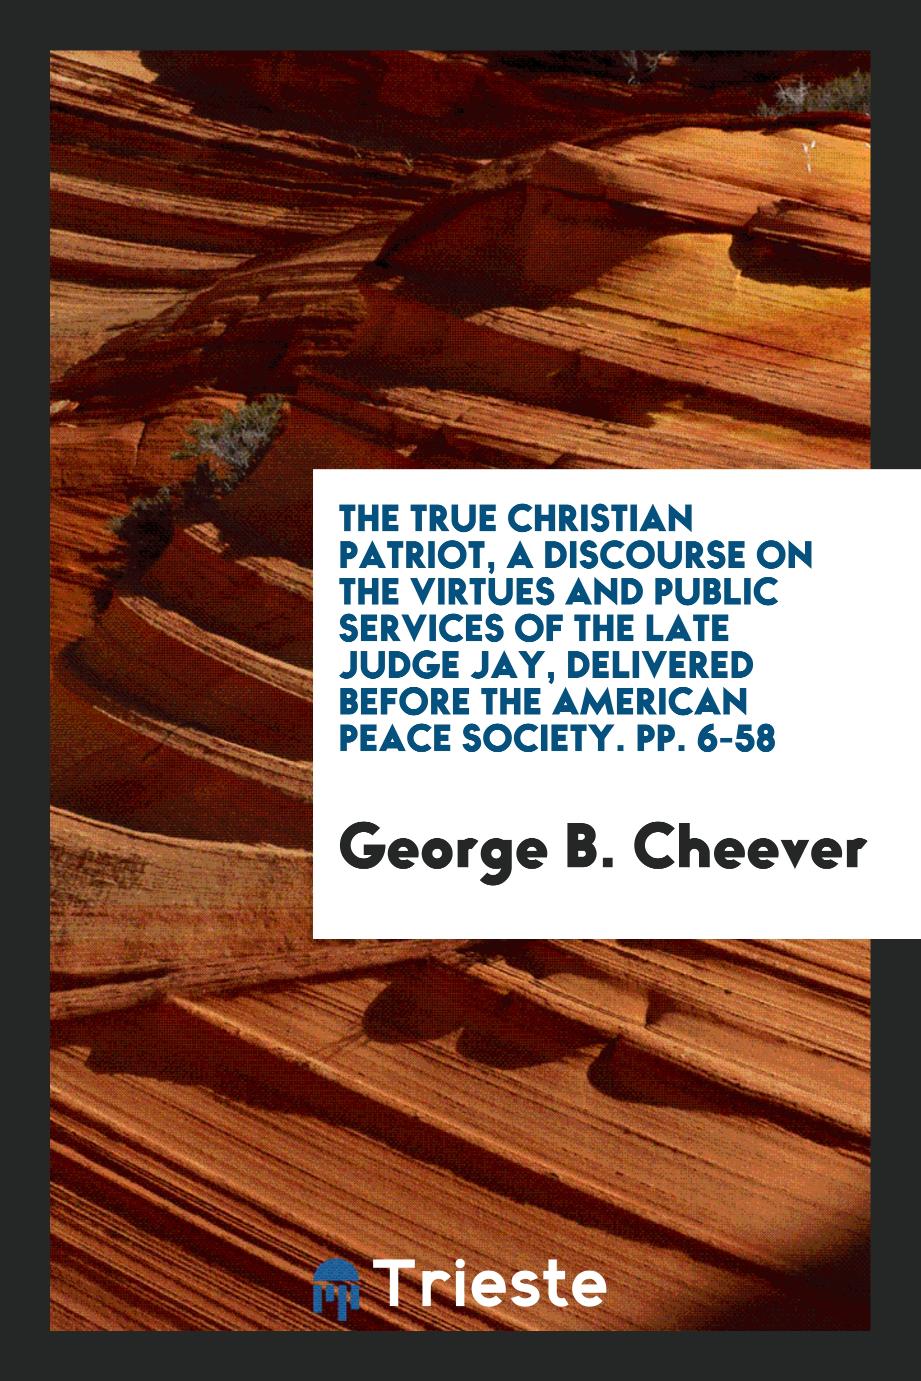 The True Christian Patriot, a Discourse on the Virtues and Public Services of the late Judge Jay, delivered before the American Peace Society. pp. 6-58